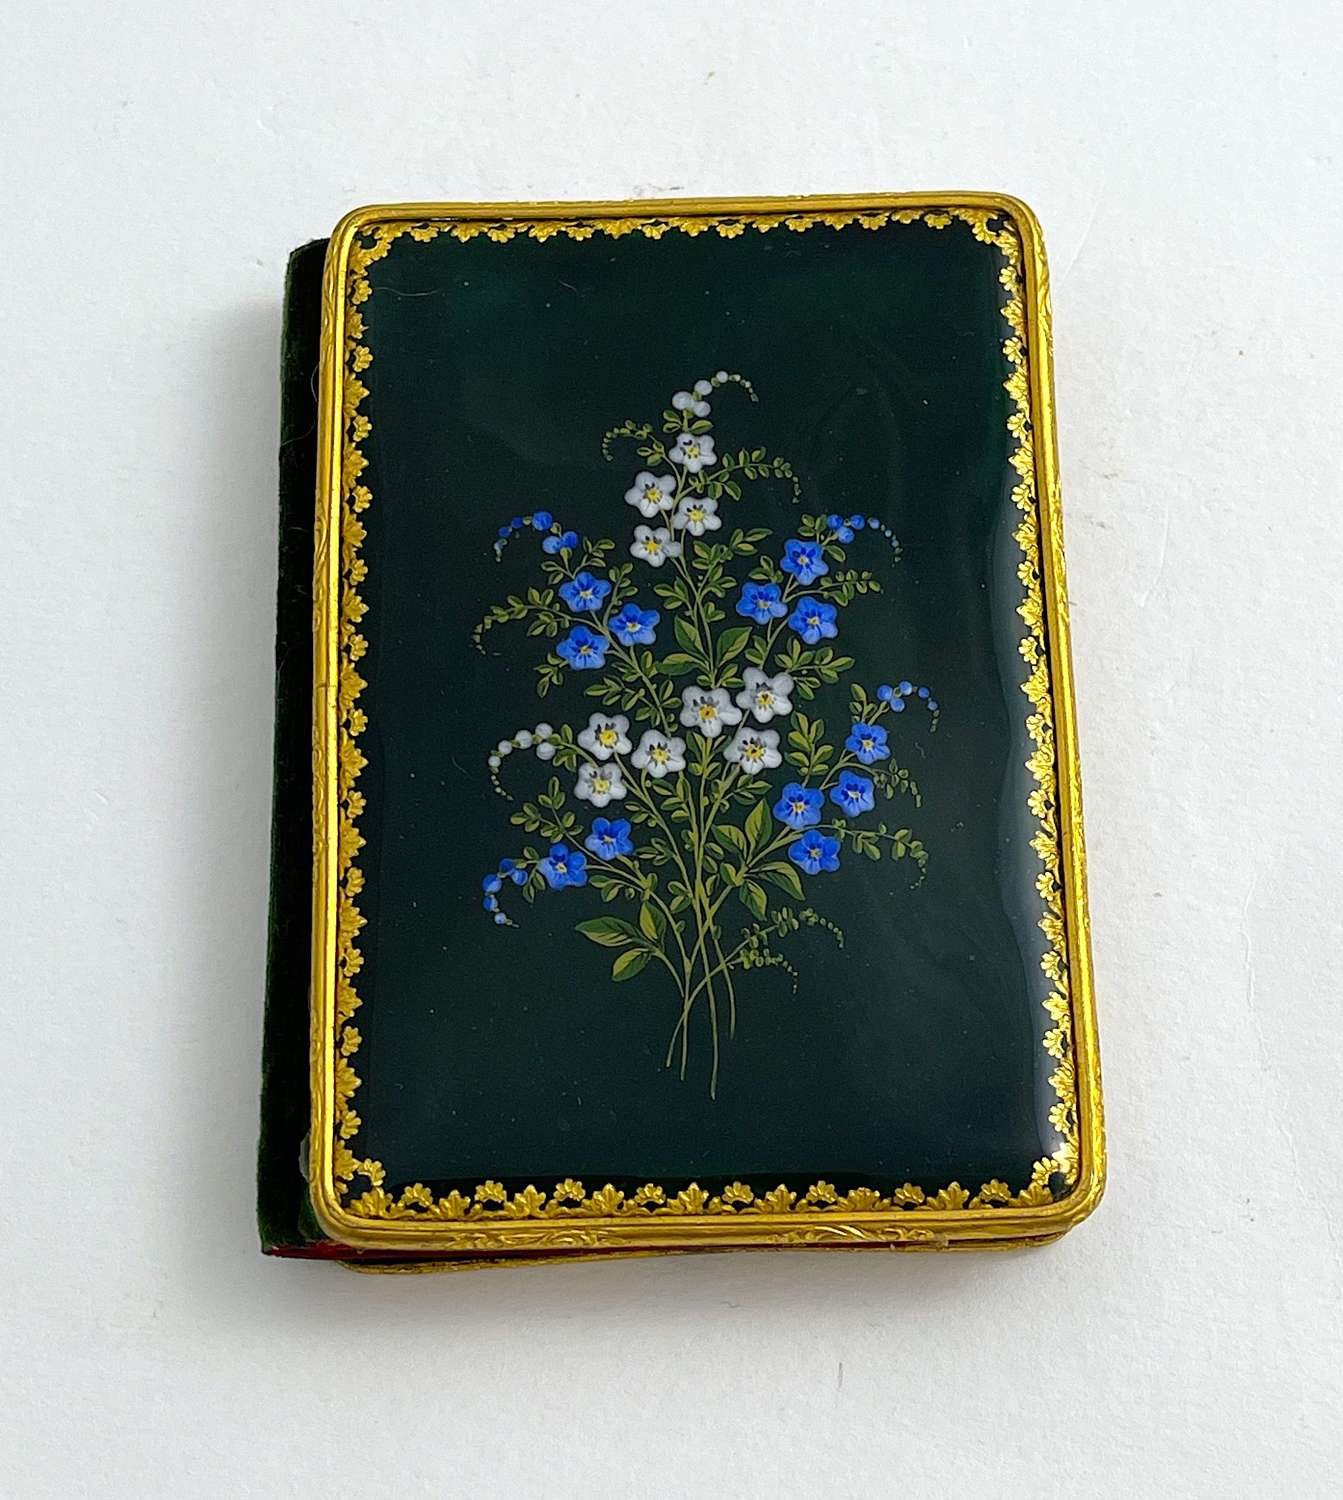 Exquisite Antique Enamel and Aide Memoire White and Blue Flowers